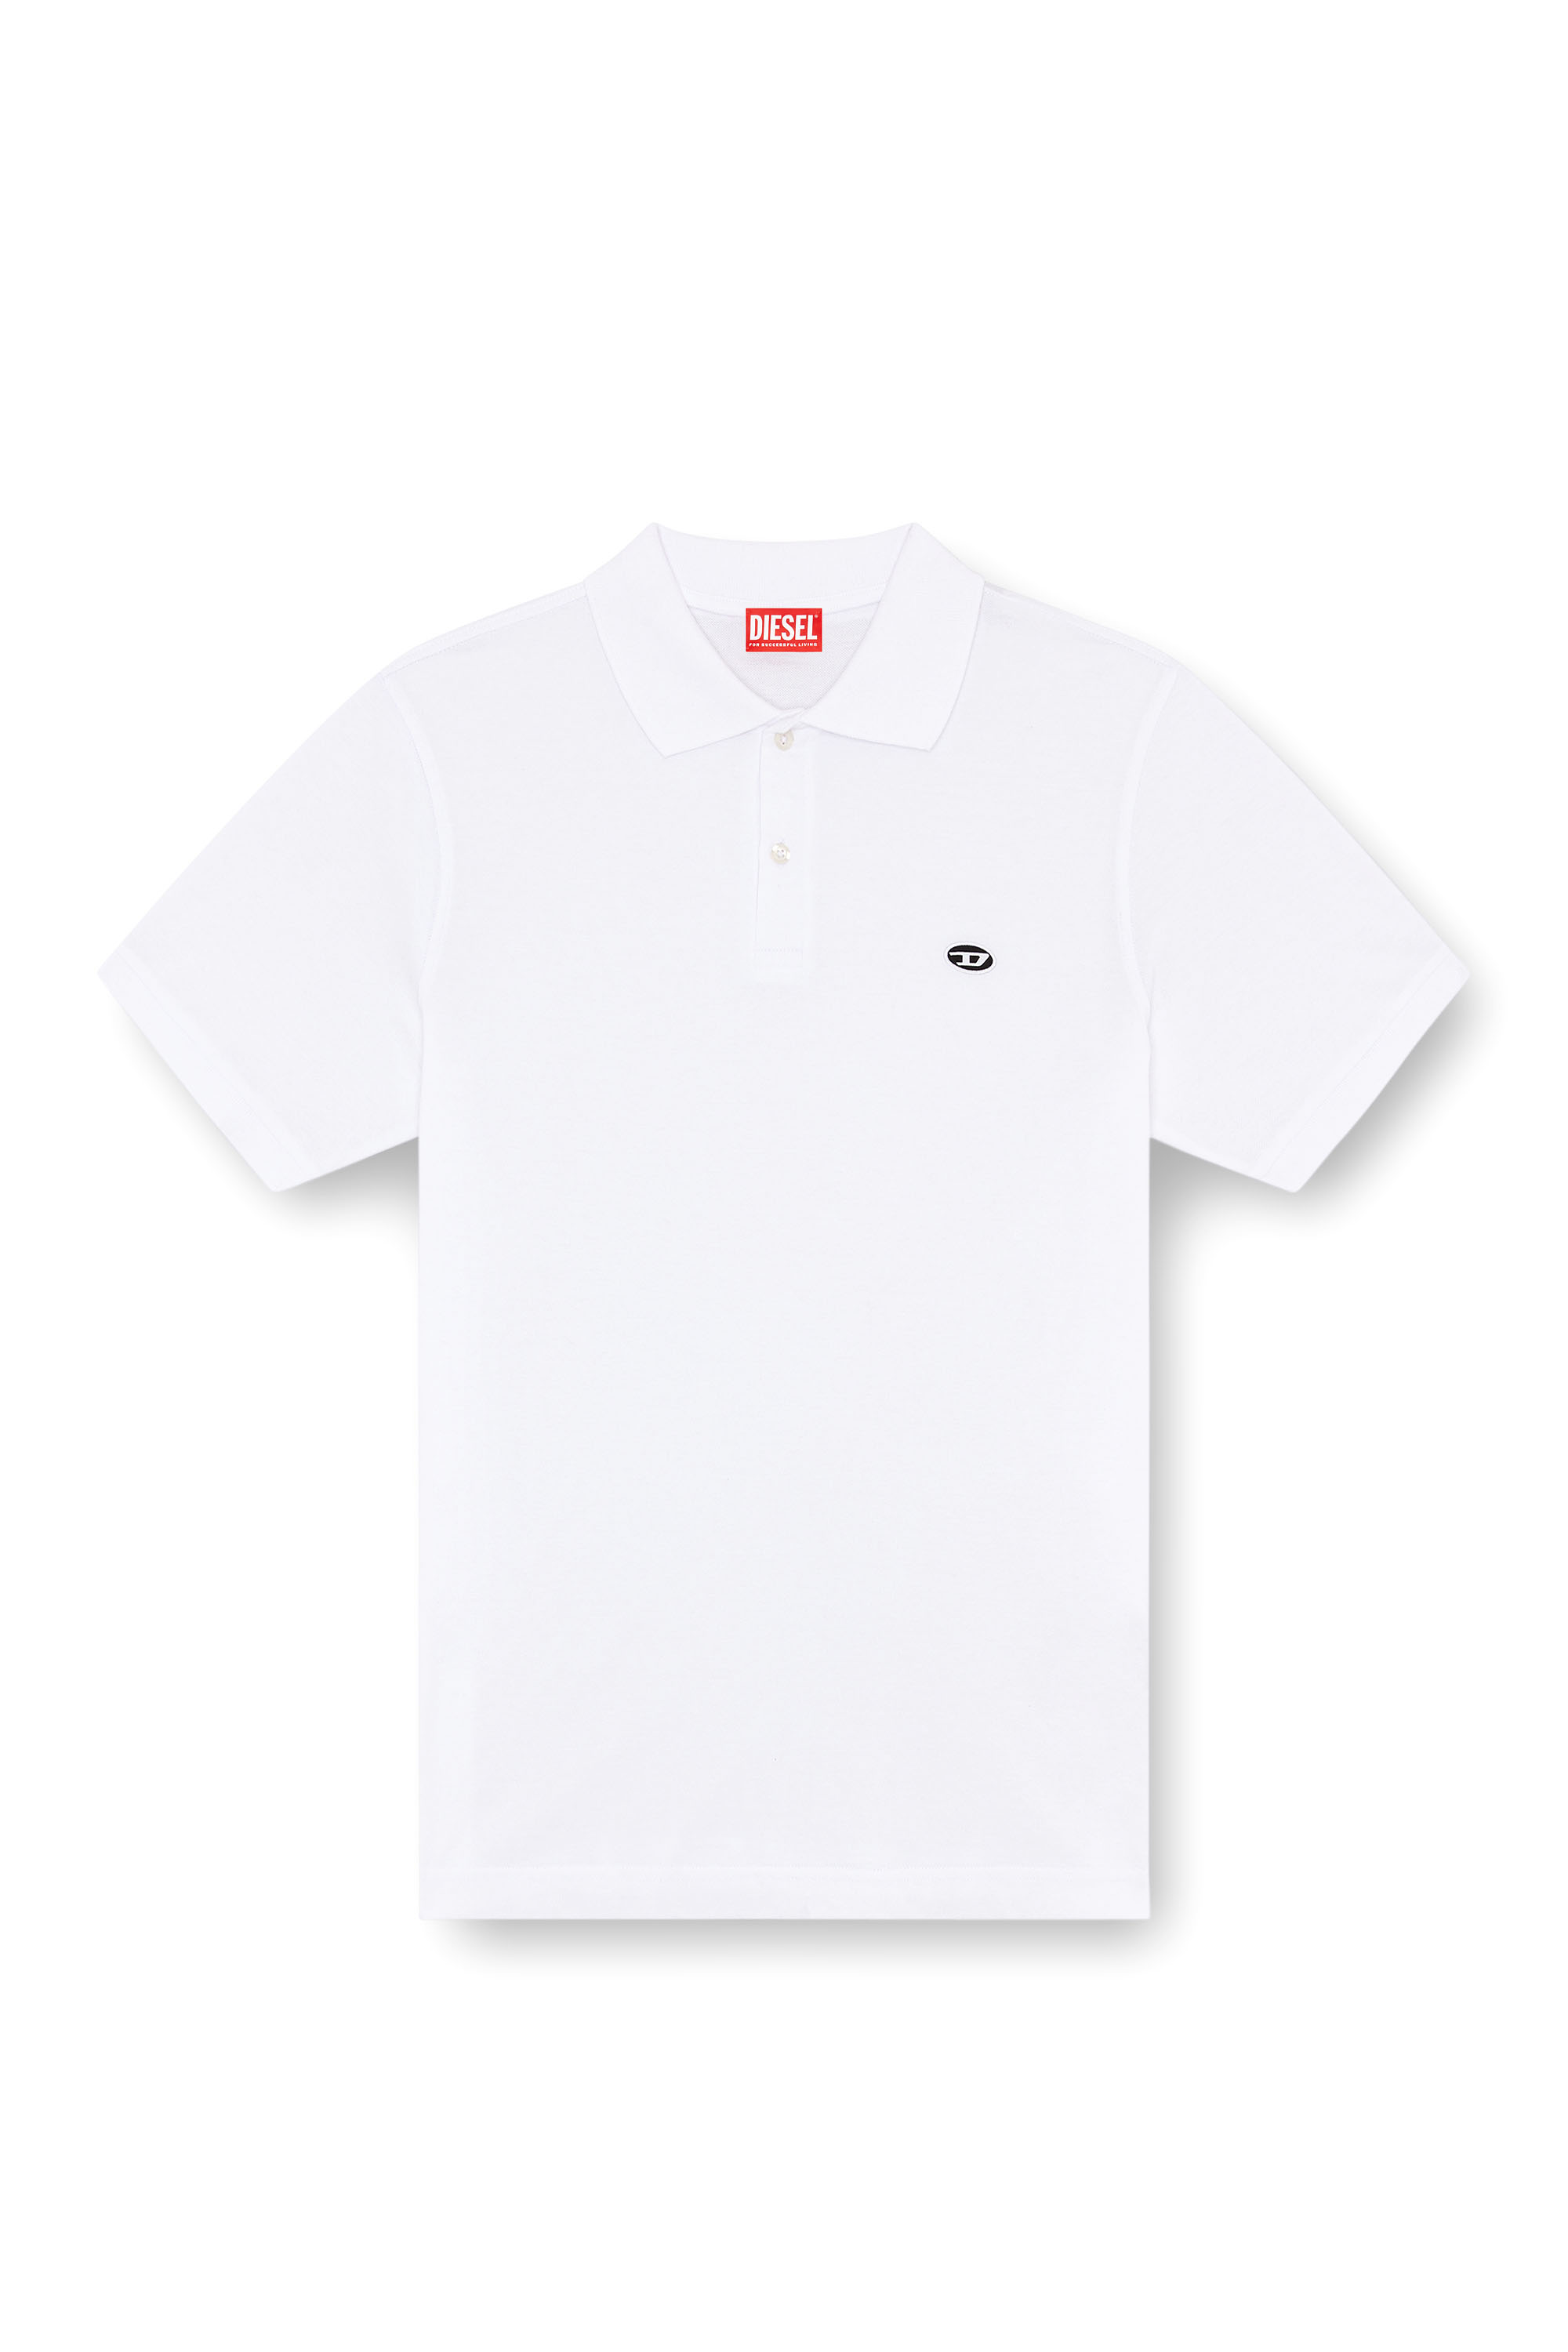 Diesel - T-REJUST-DOVAL-PJ, Man Polo shirt with Oval D patch in White - Image 4